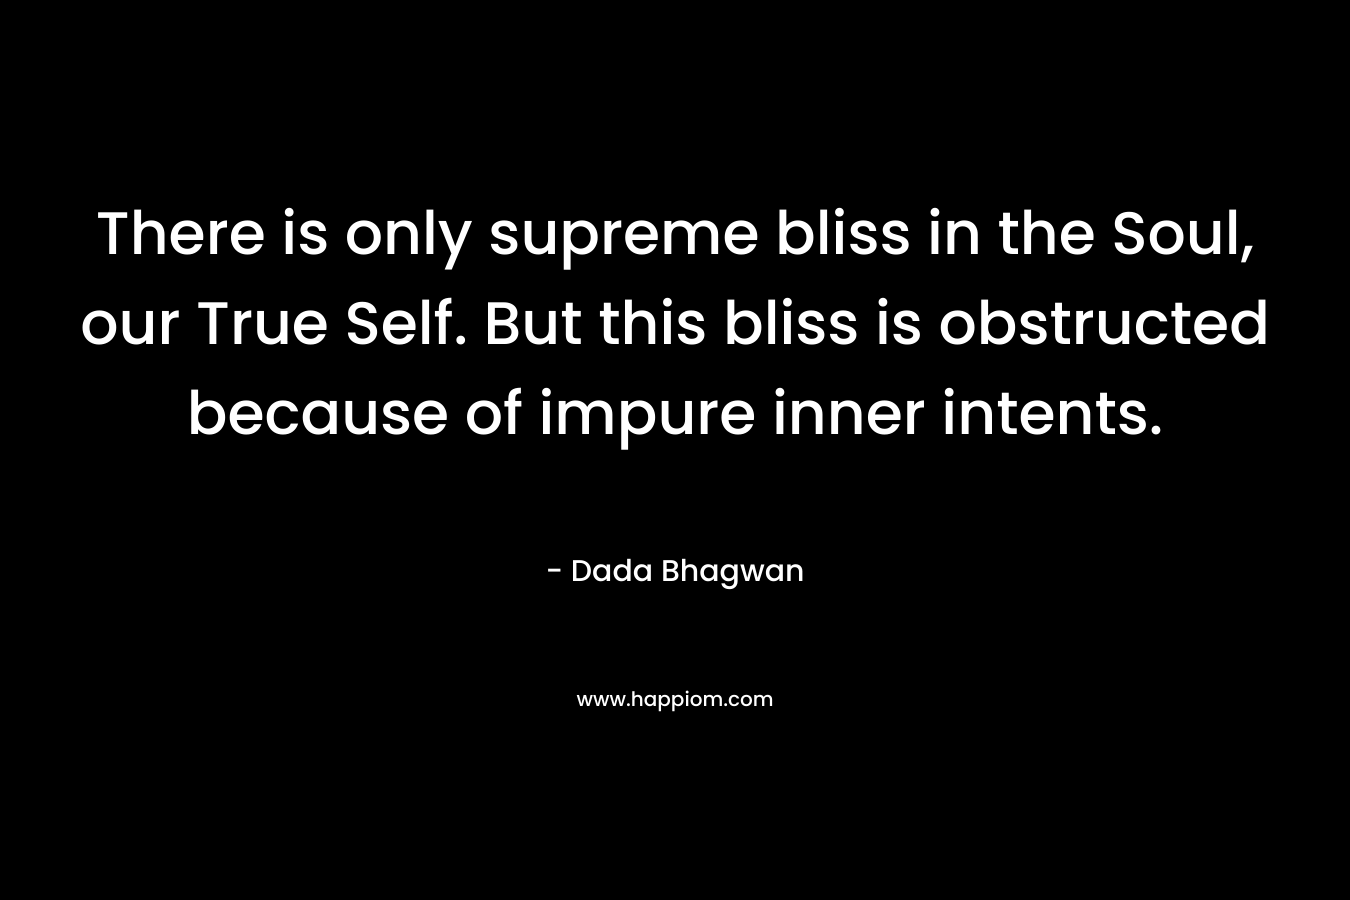 There is only supreme bliss in the Soul, our True Self. But this bliss is obstructed because of impure inner intents.